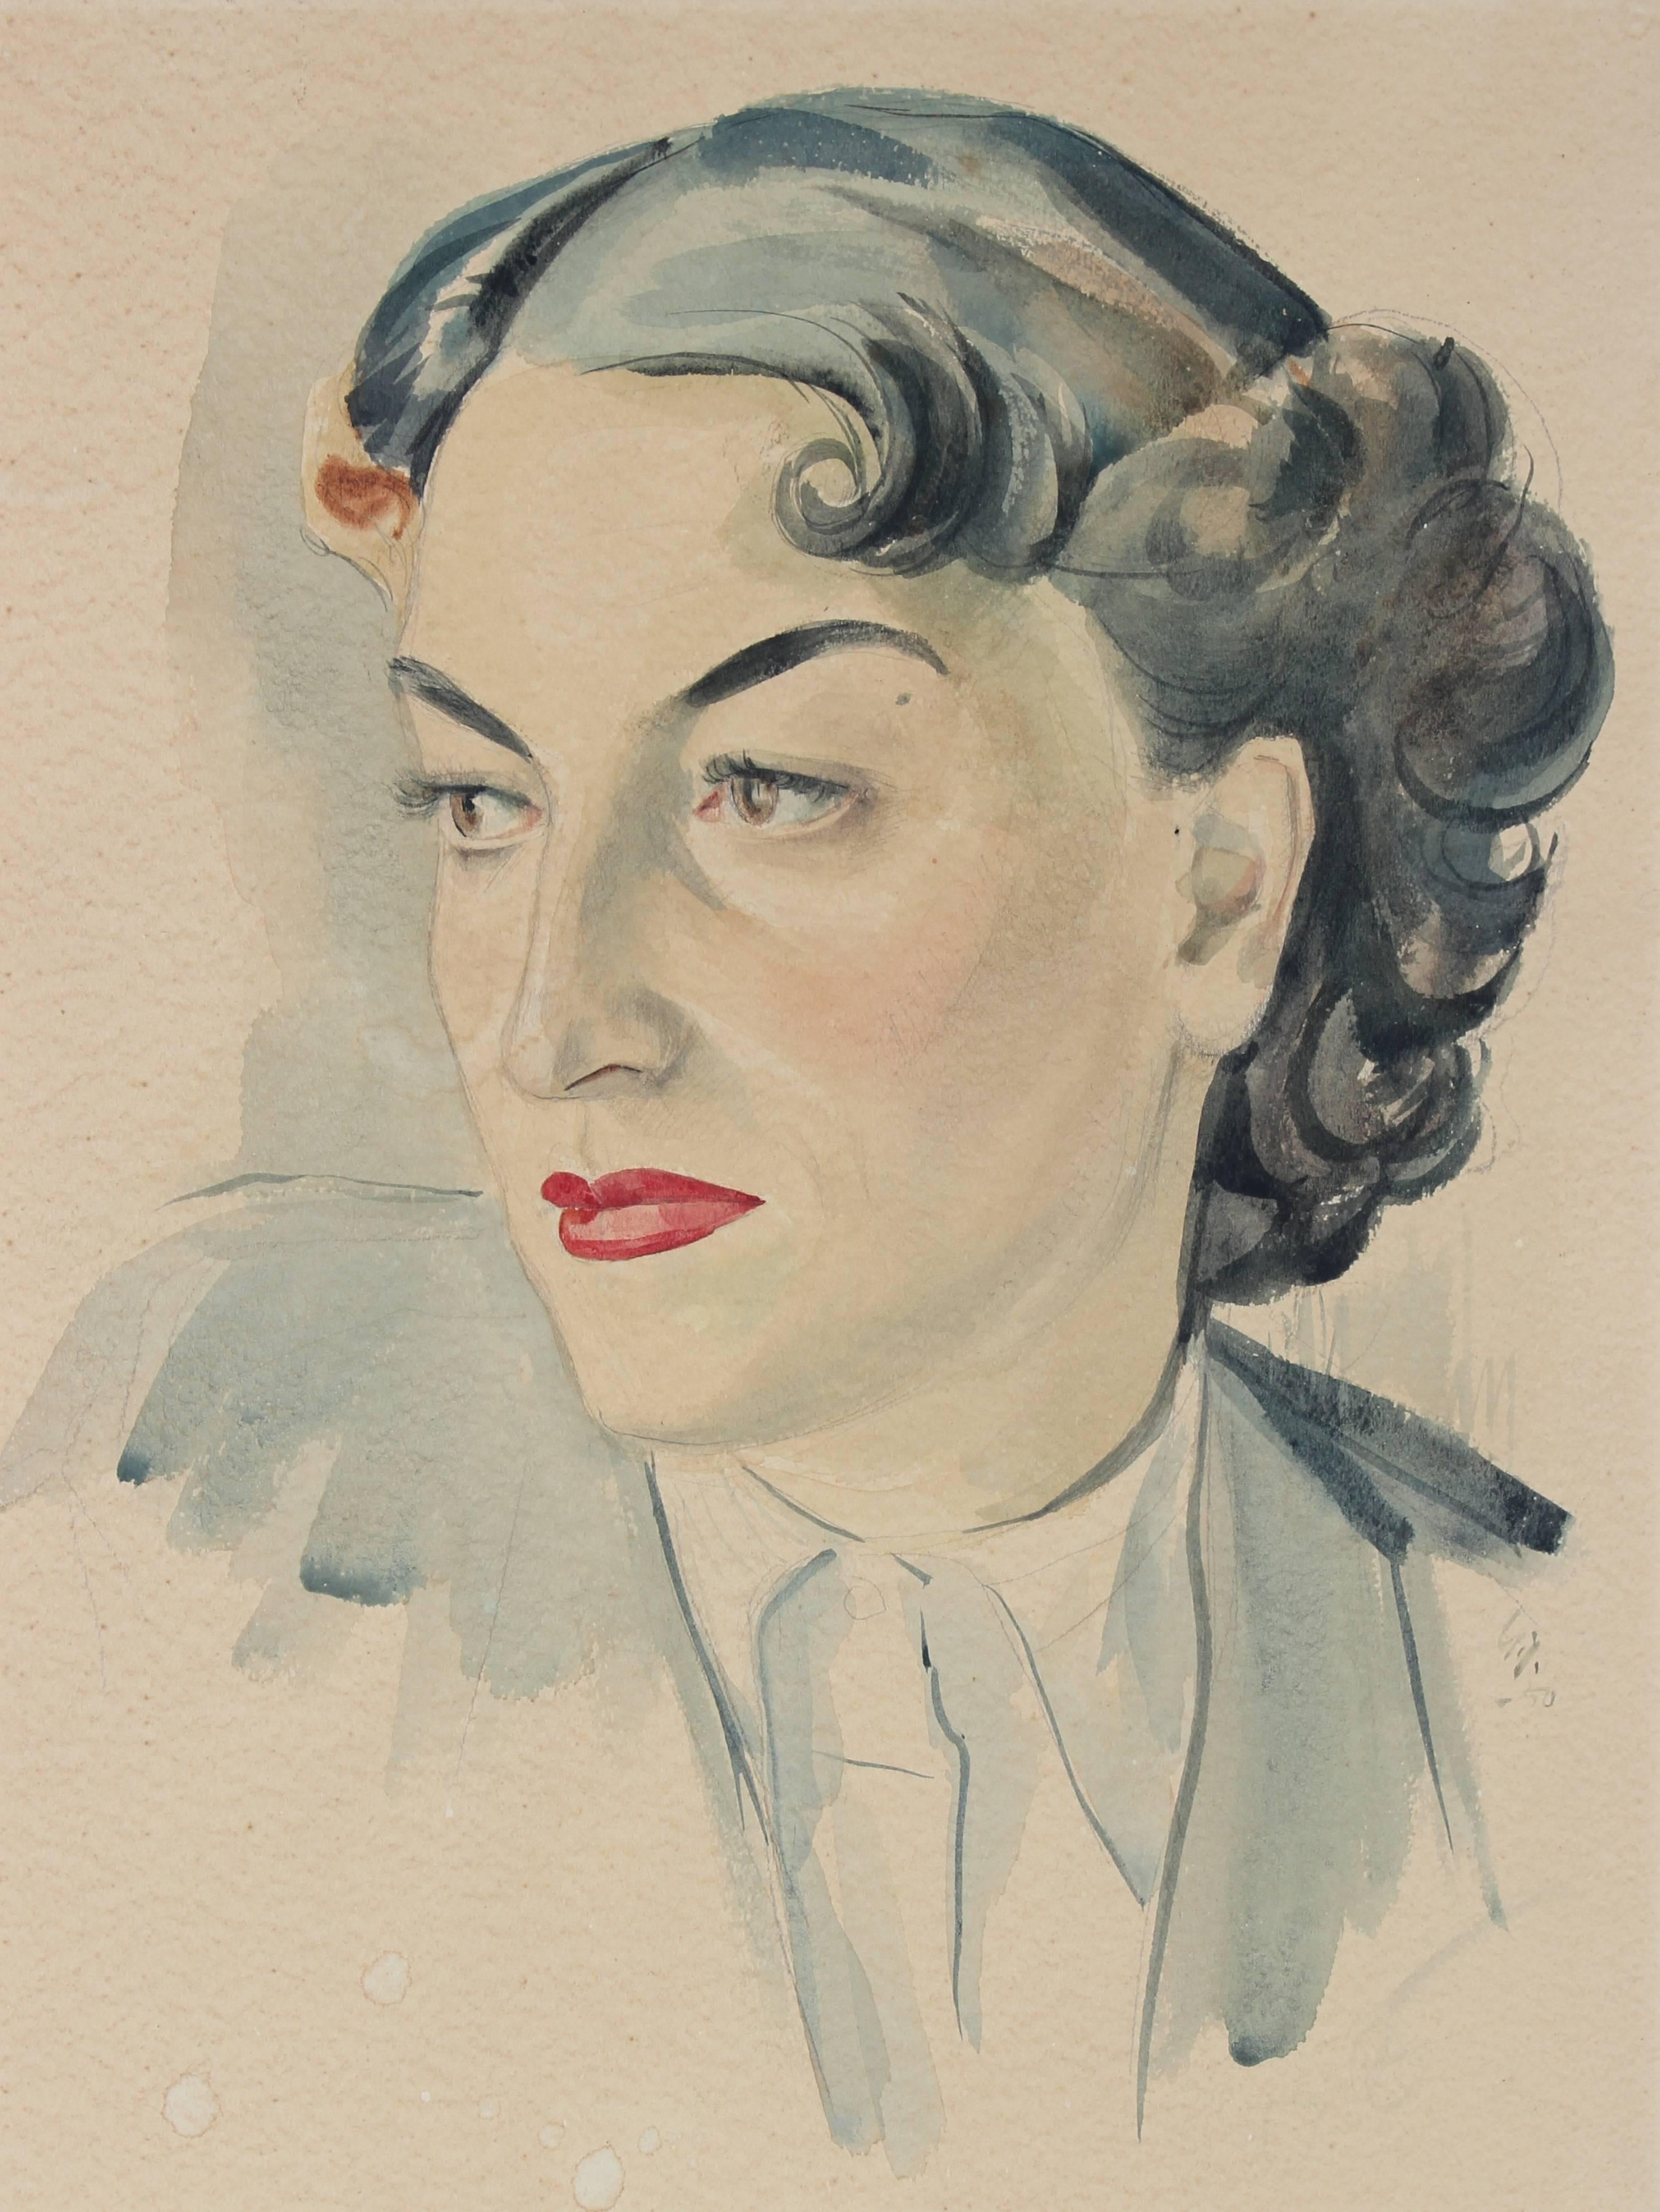 Portrait of a Woman with Red Lipstick, Watercolor Painting, Circa 1930 - Art by Unknown